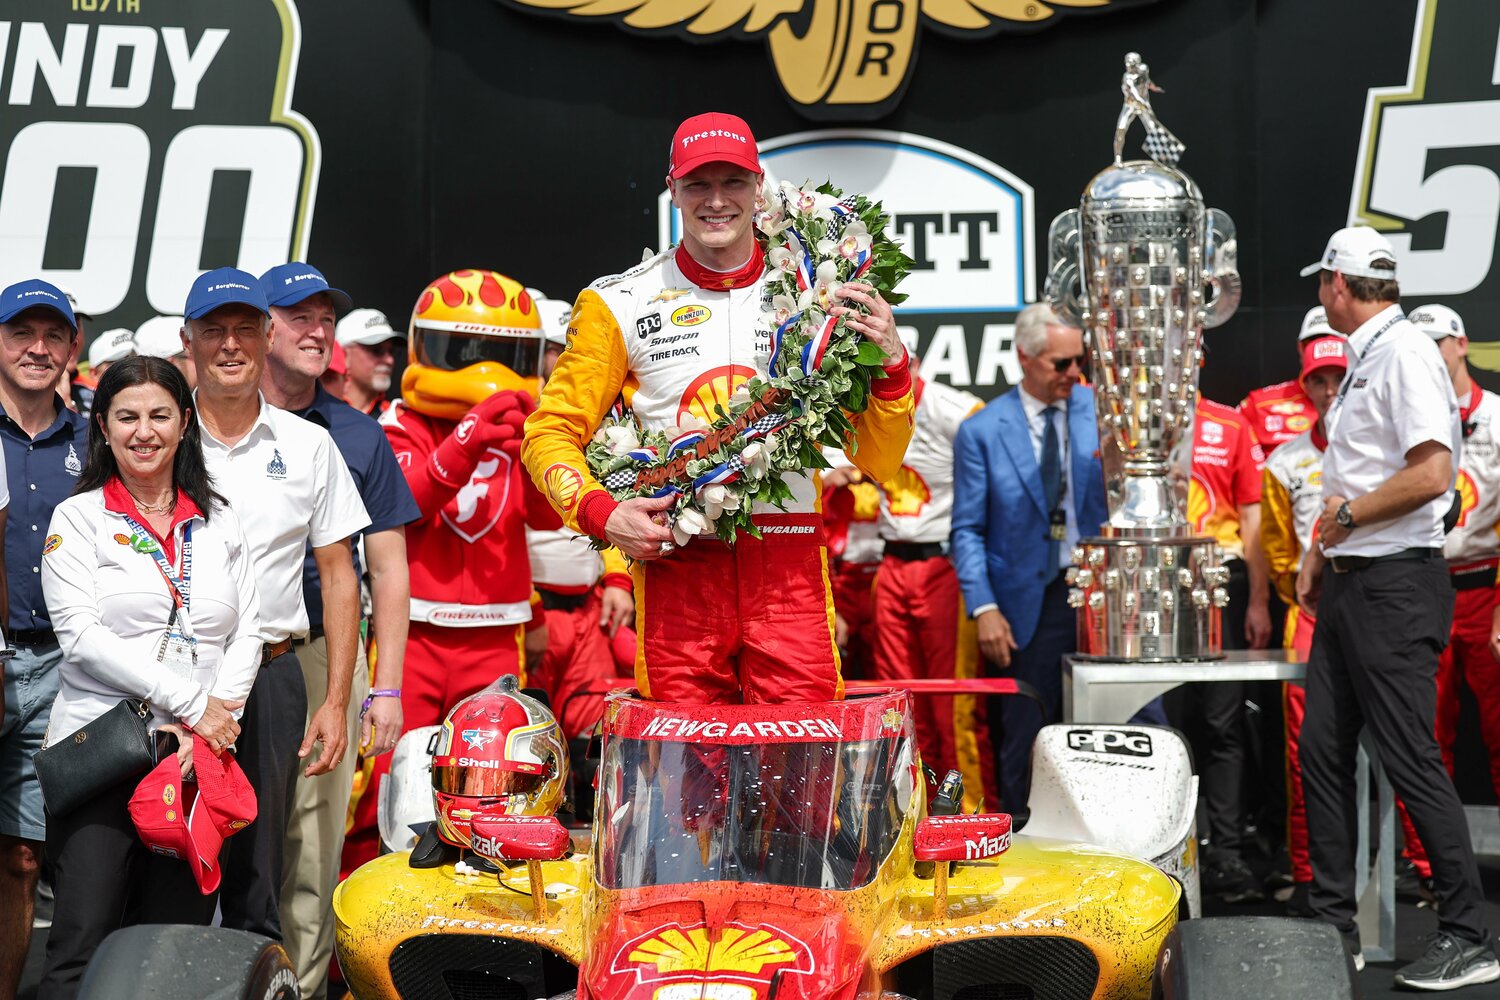 Josef Newgarden captured his first Indy 500 win of his career on Sunday by passing defending champion 
Marcus Ericsson on the final lap of the race.